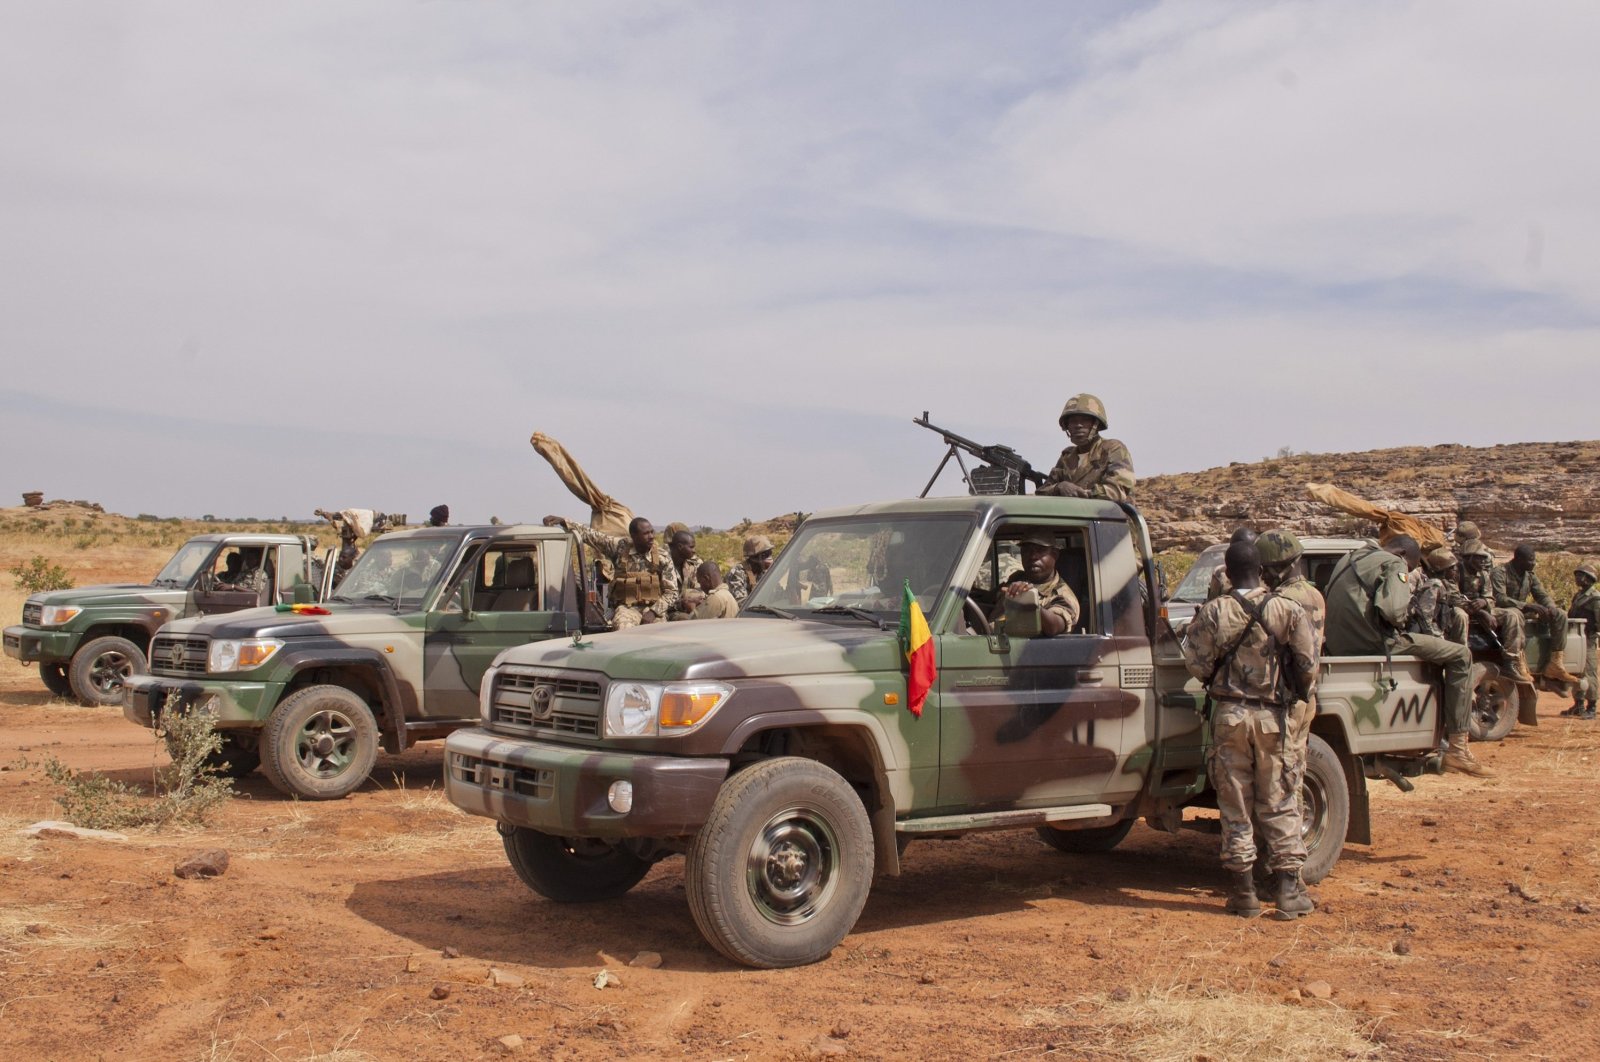 Soldiers from a Malian army special unit stand atop pick-ups mounted with machine guns, following a training exercise in the Barbe military zone, in Mopti, Mali, Nov. 24, 2012. (AP Photo)